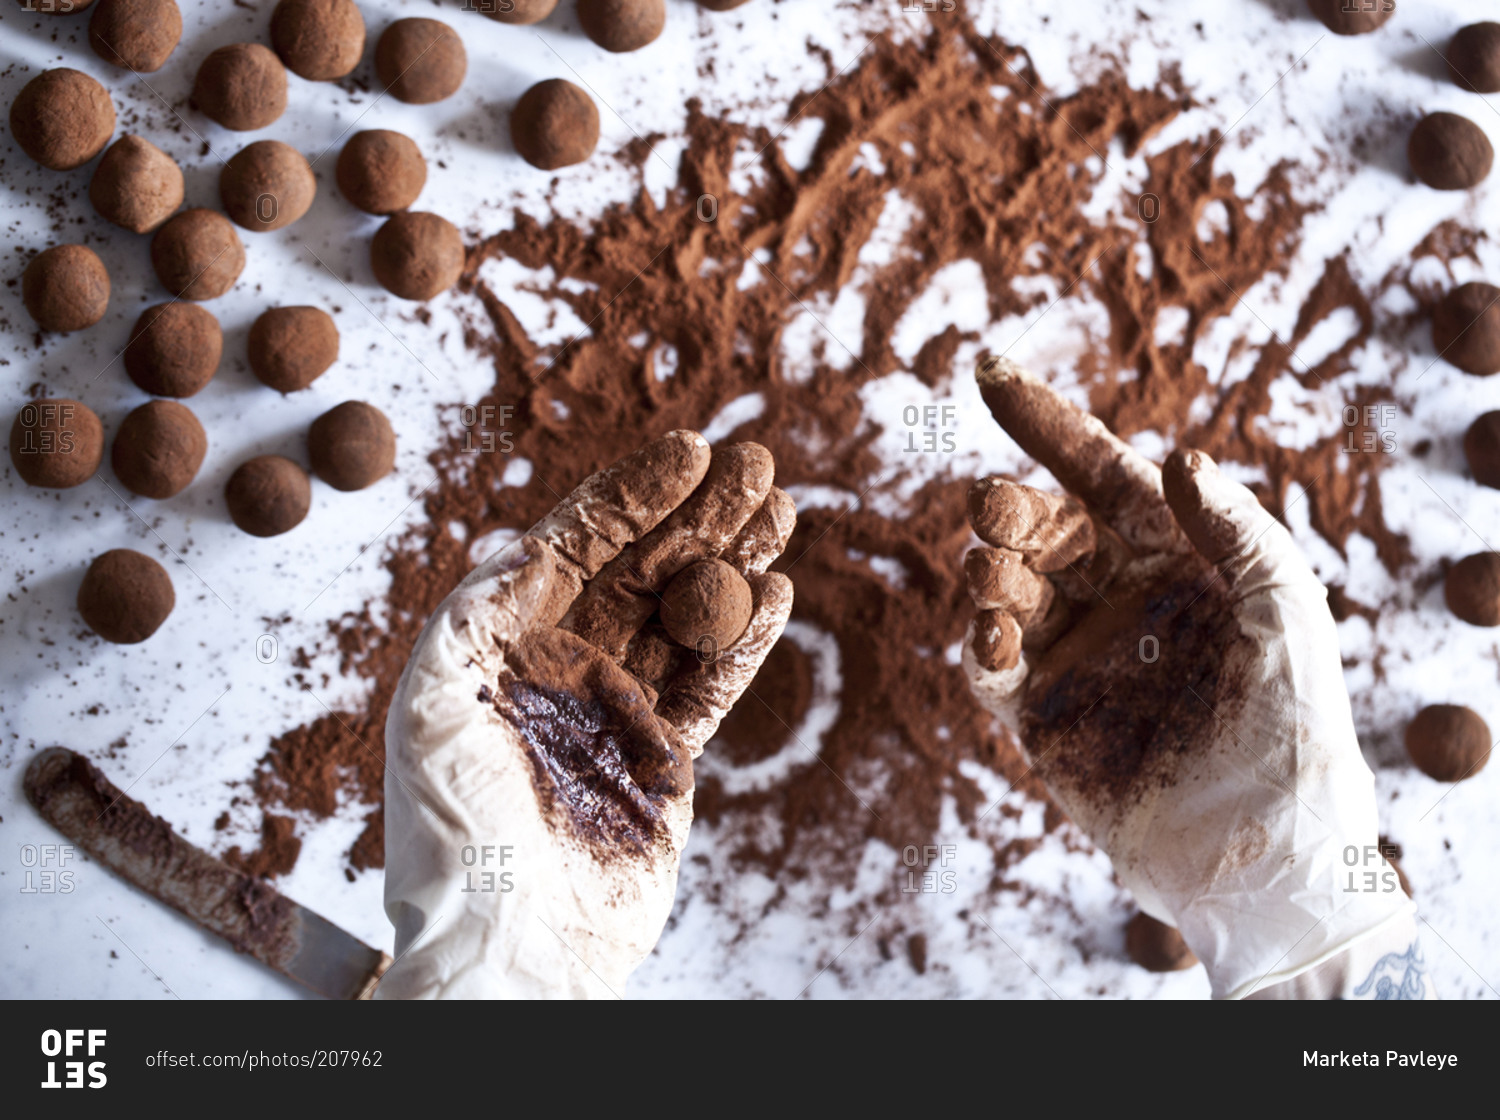 A cook rolls truffles in cocoa